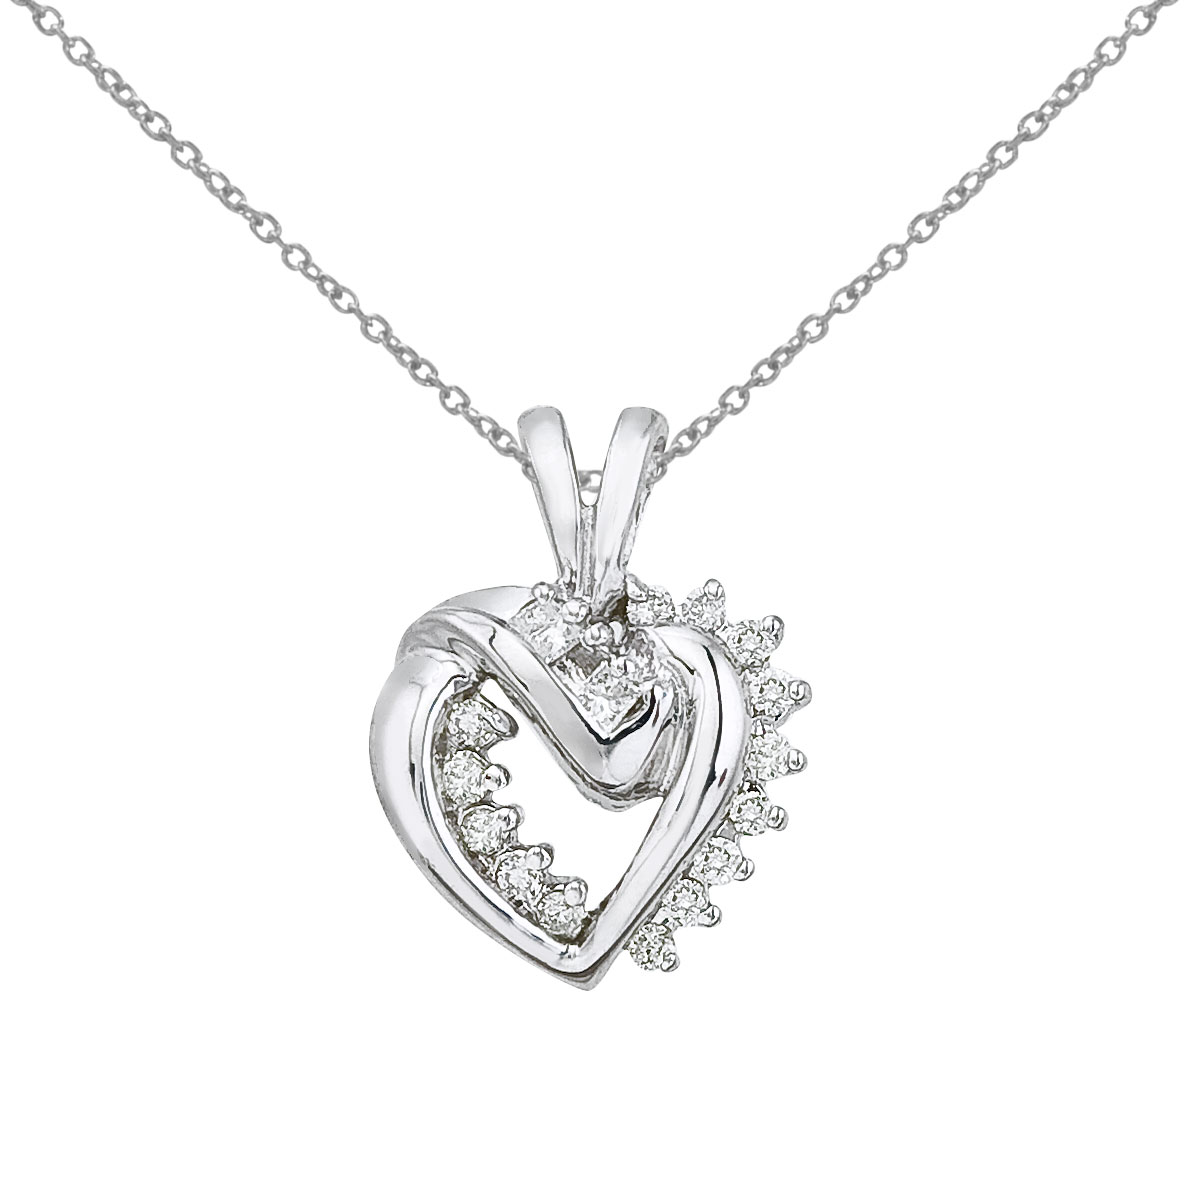 Stunning heart shaped pendant set in 14k white gold with shimmering diamonds.